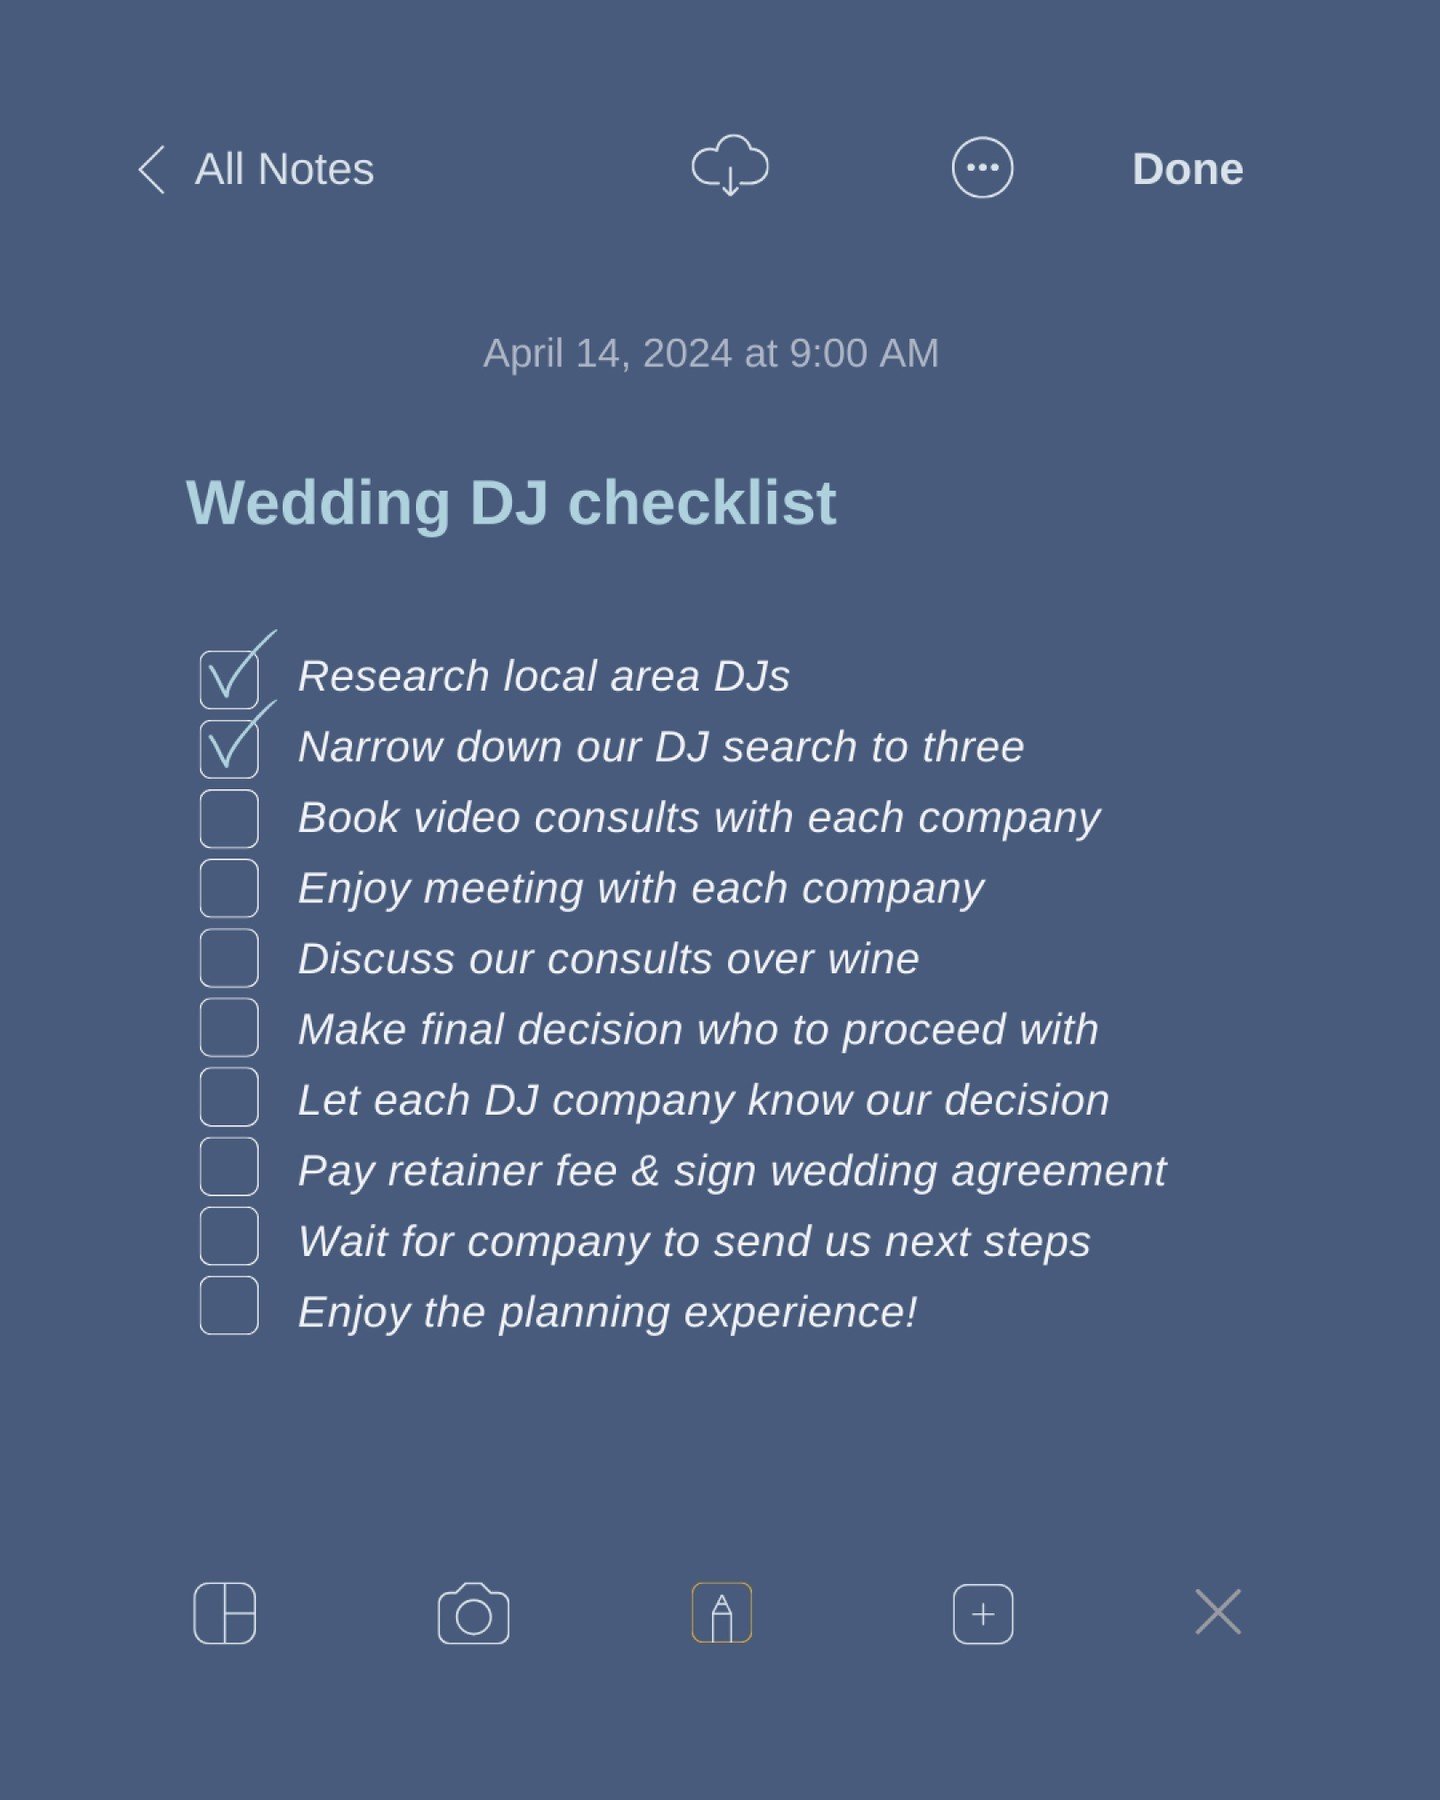 Here is your guide to connecting with your Wedding DJ company...

Whoever had a checklist they didn&rsquo;t save? 📌

If you need any assistance, reach out anytime!

Enjoy 🤗